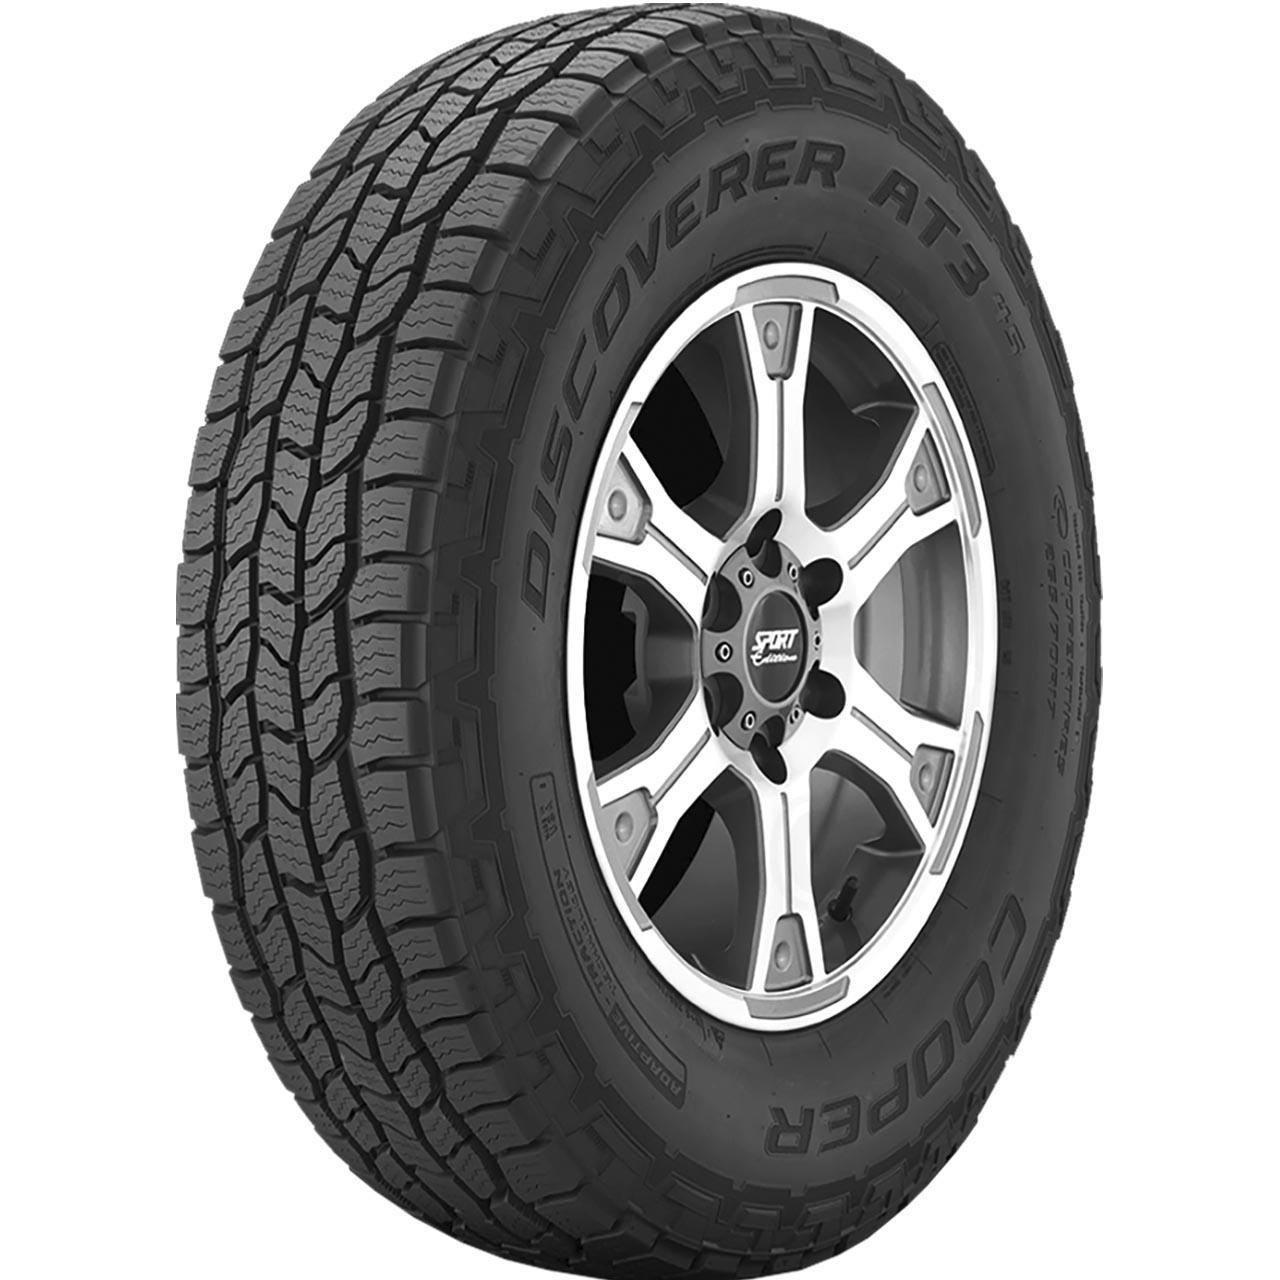 Cooper Discoverer AT3 4S 235/75R15 109T XL OWL